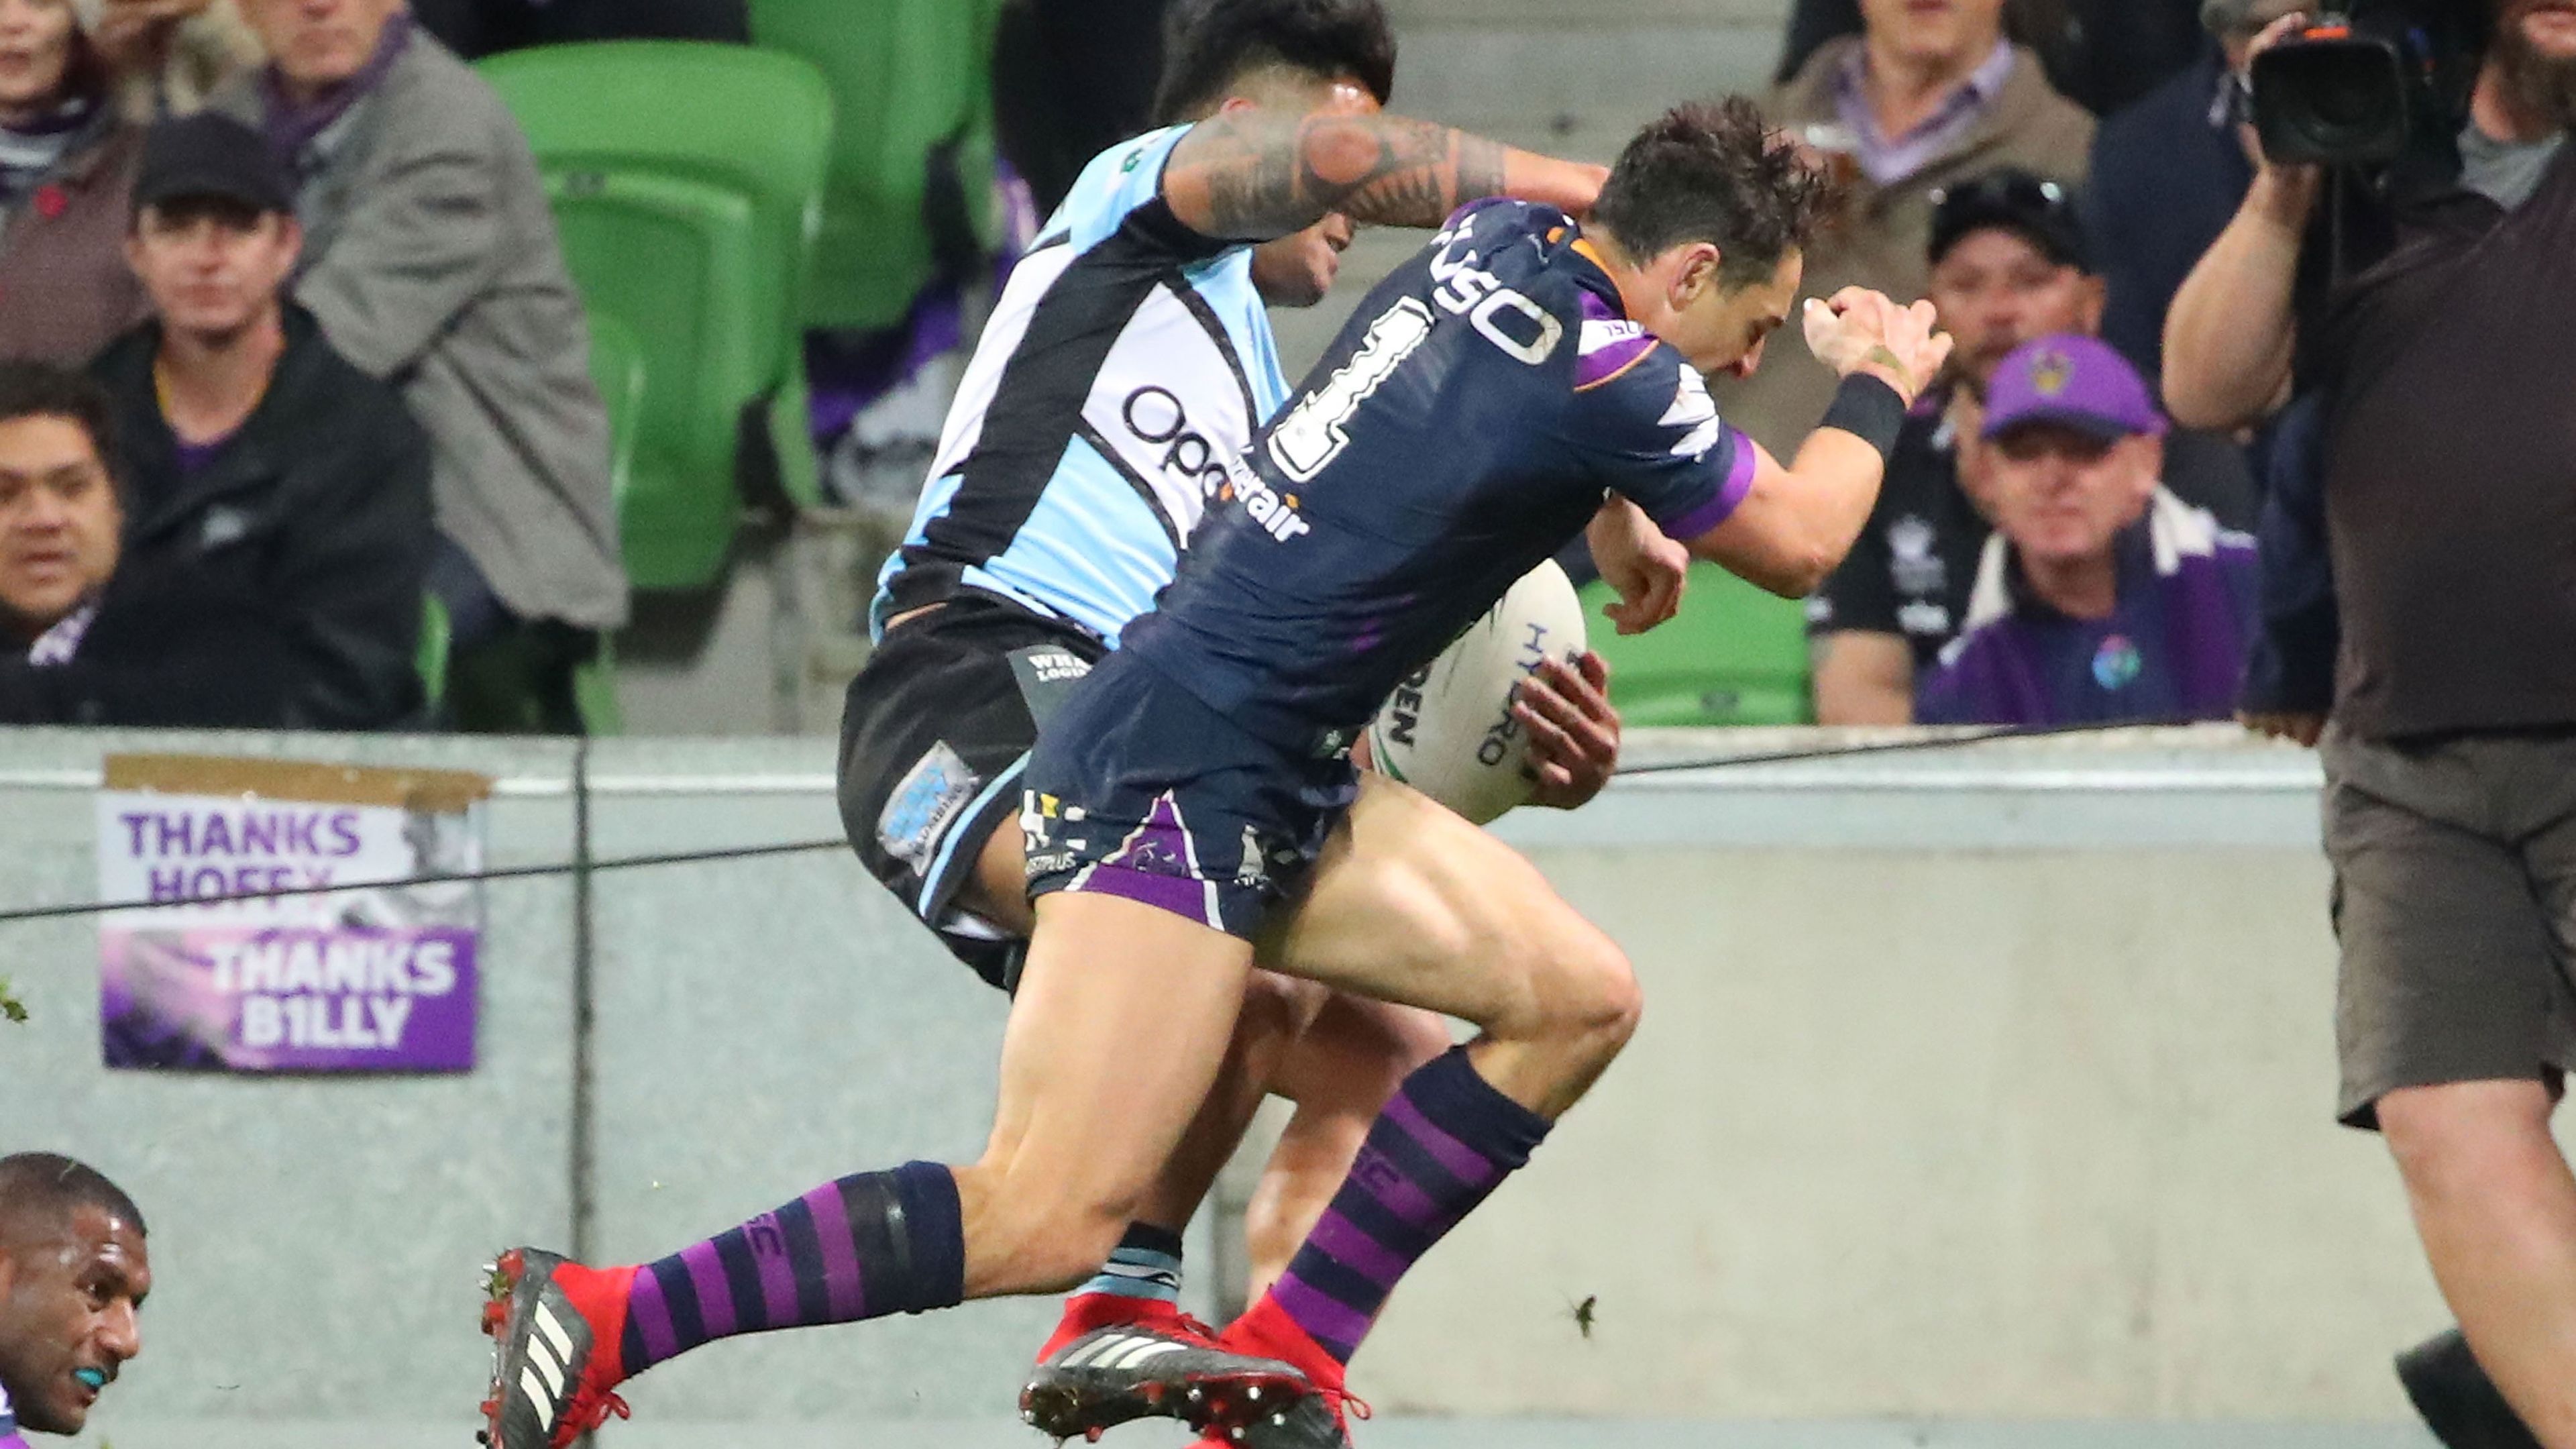 Andrew Johns and Johnathan Thurston expect Billy Slater to face shoulder charge ban